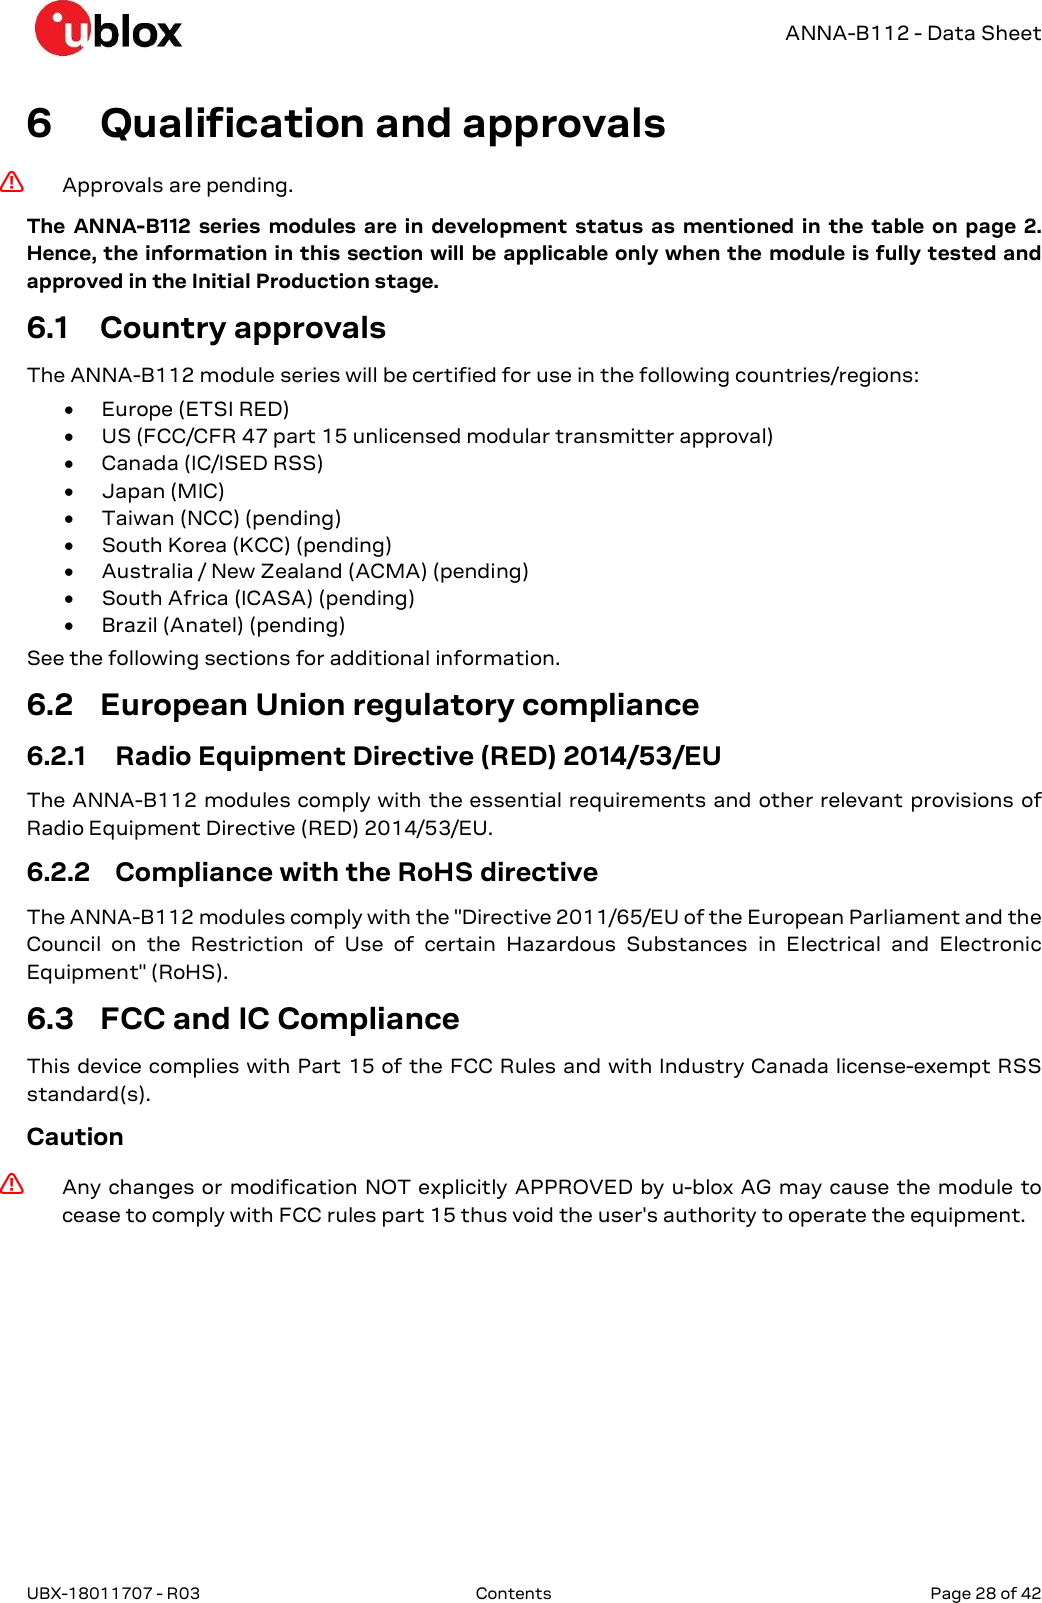   ANNA-B112 - Data Sheet UBX-18011707 - R03  Contents   Page 28 of 42      6 Qualification and approvals ⚠ Approvals are pending.  The  ANNA-B112  series  modules  are  in  development  status  as  mentioned  in  the  table  on  page  2. Hence, the information in this section will be applicable only when the module is fully tested and approved in the Initial Production stage. 6.1 Country approvals The ANNA-B112 module series will be certified for use in the following countries/regions:   Europe (ETSI RED)  US (FCC/CFR 47 part 15 unlicensed modular transmitter approval)  Canada (IC/ISED RSS)  Japan (MIC)  Taiwan (NCC) (pending)  South Korea (KCC) (pending)  Australia / New Zealand (ACMA) (pending)  South Africa (ICASA) (pending)  Brazil (Anatel) (pending) See the following sections for additional information. 6.2 European Union regulatory compliance 6.2.1 Radio Equipment Directive (RED) 2014/53/EU The ANNA-B112 modules comply with the essential requirements and other relevant provisions of Radio Equipment Directive (RED) 2014/53/EU.  6.2.2 Compliance with the RoHS directive The ANNA-B112 modules comply with the &quot;Directive 2011/65/EU of the European Parliament and the Council  on  the  Restriction  of  Use  of  certain  Hazardous  Substances  in  Electrical  and  Electronic Equipment&quot; (RoHS). 6.3 FCC and IC Compliance This device complies with Part 15 of the FCC Rules and with Industry Canada license-exempt RSS standard(s).  Caution ⚠ Any changes  or modification  NOT explicitly APPROVED by u-blox AG may cause the module  to cease to comply with FCC rules part 15 thus void the user&apos;s authority to operate the equipment. 